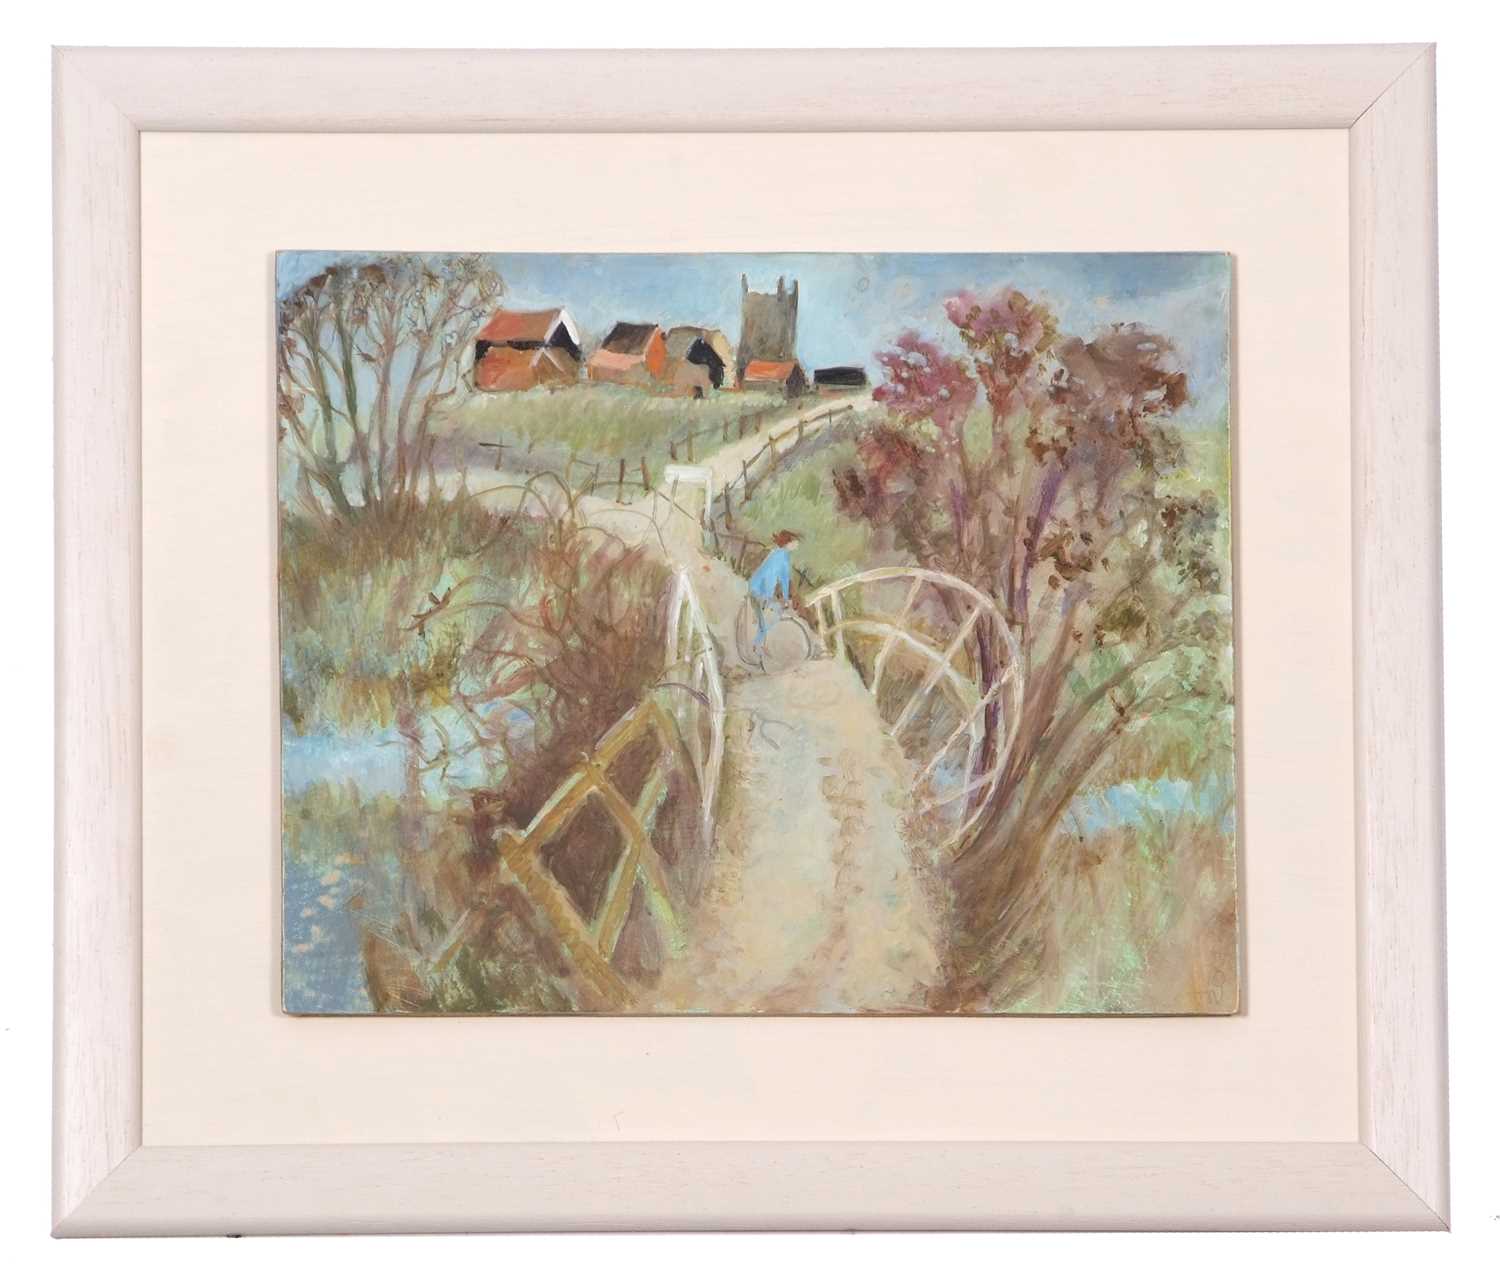 Tessa Newcomb (b.1955) 'Riding over the bridge', signed and dated 2010, 20x25.5cm, framed.